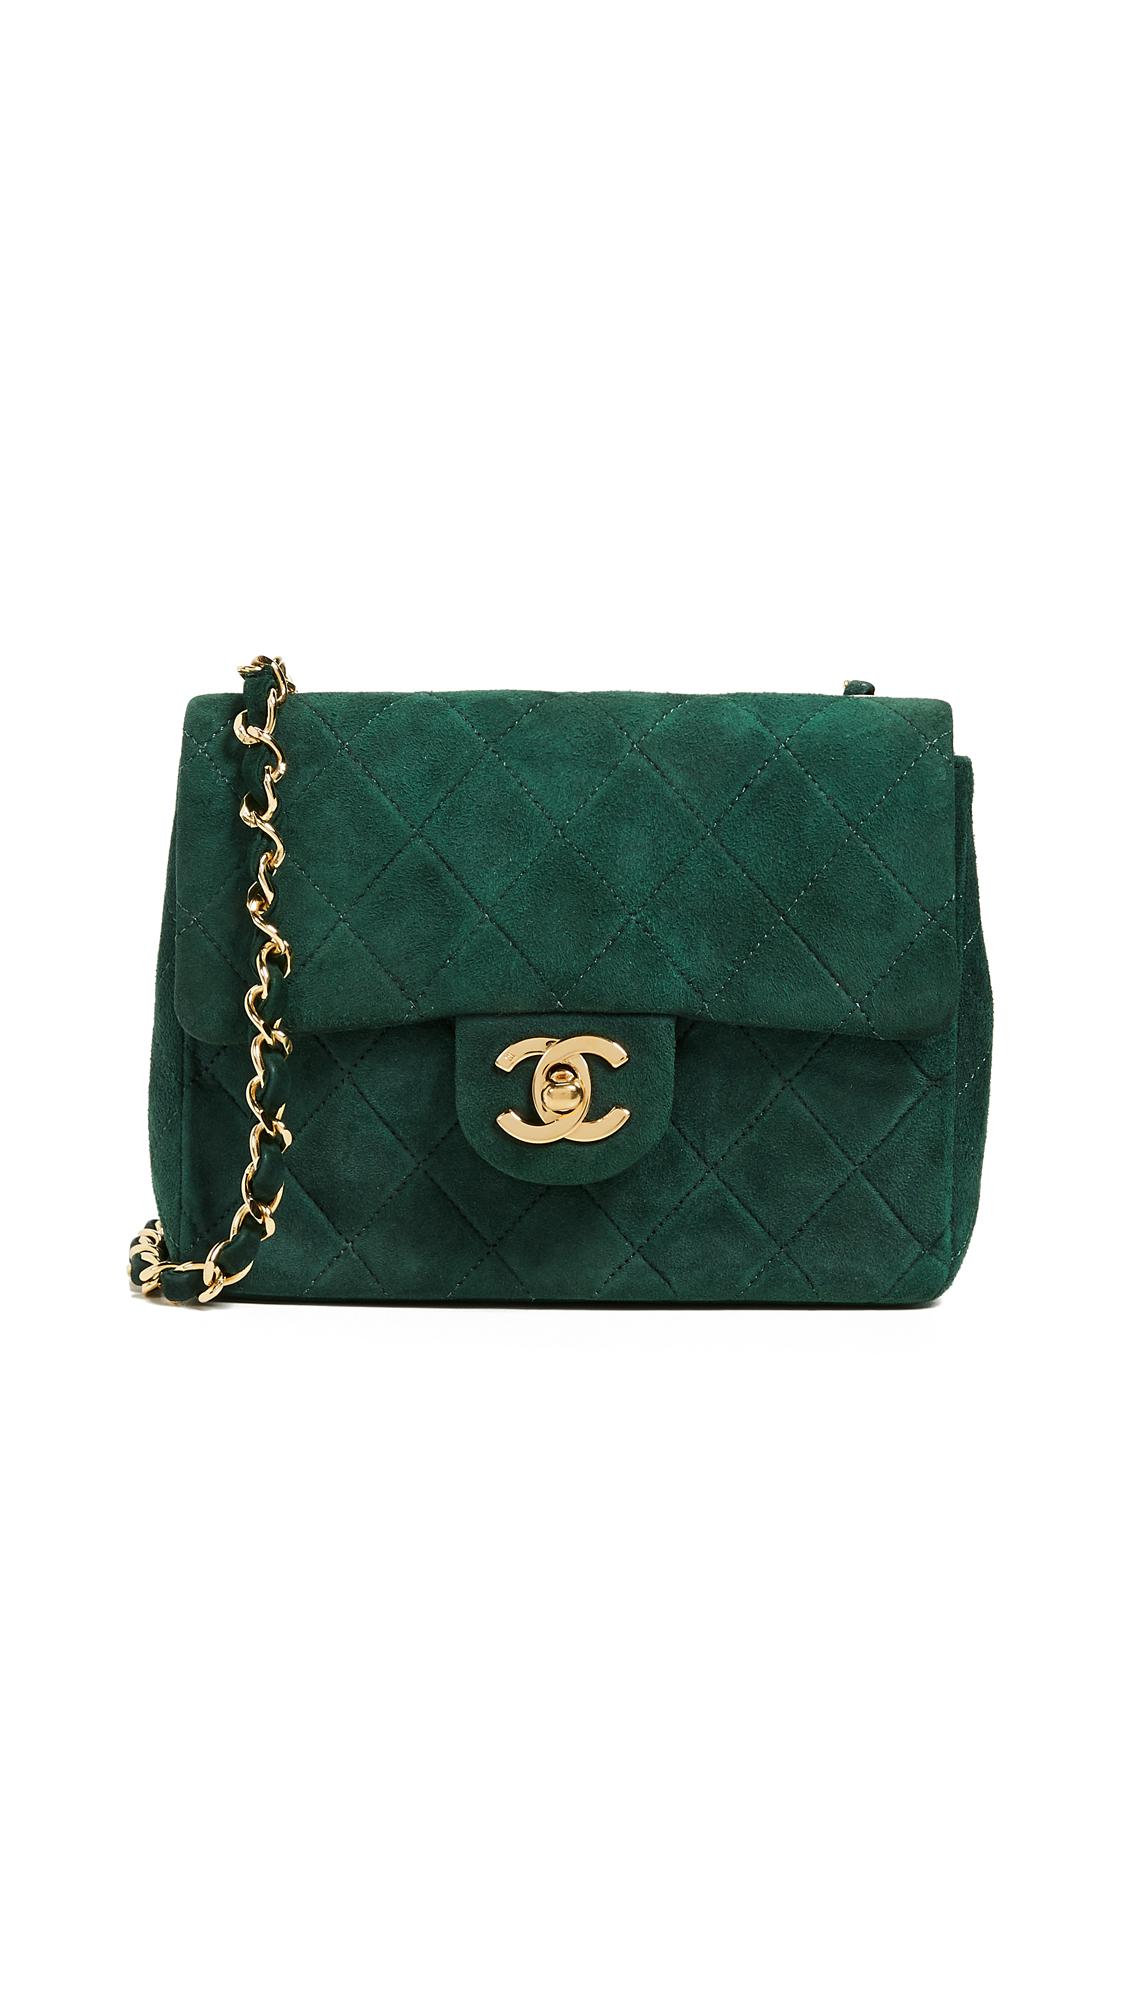 Chanel Green Suede Gold Small Micro Mini Party Crossbody Shoulder Flap Bag